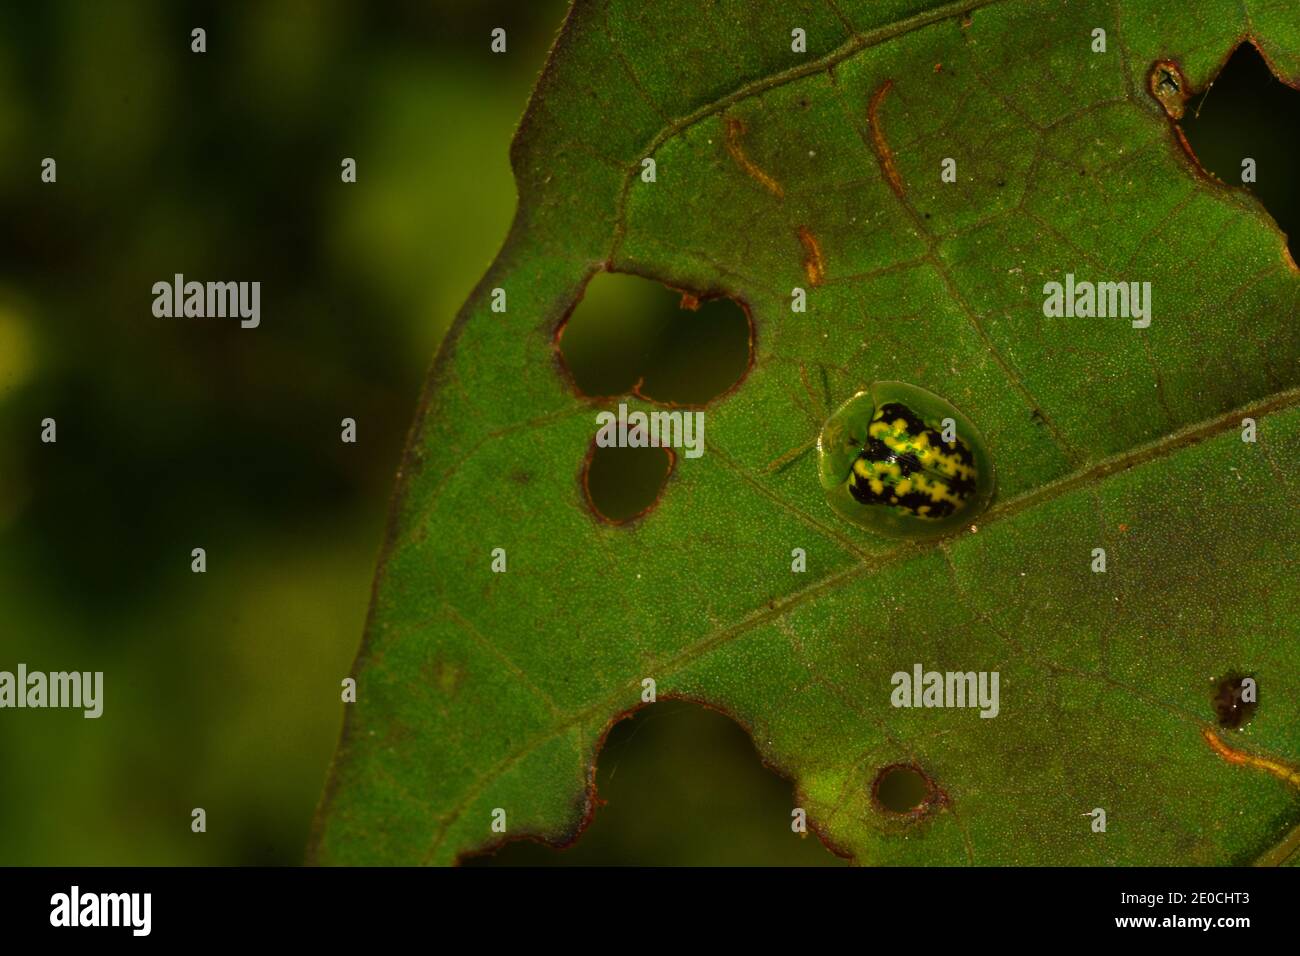 A black spotted green tortoise beetle rest on a leaf Stock Photo